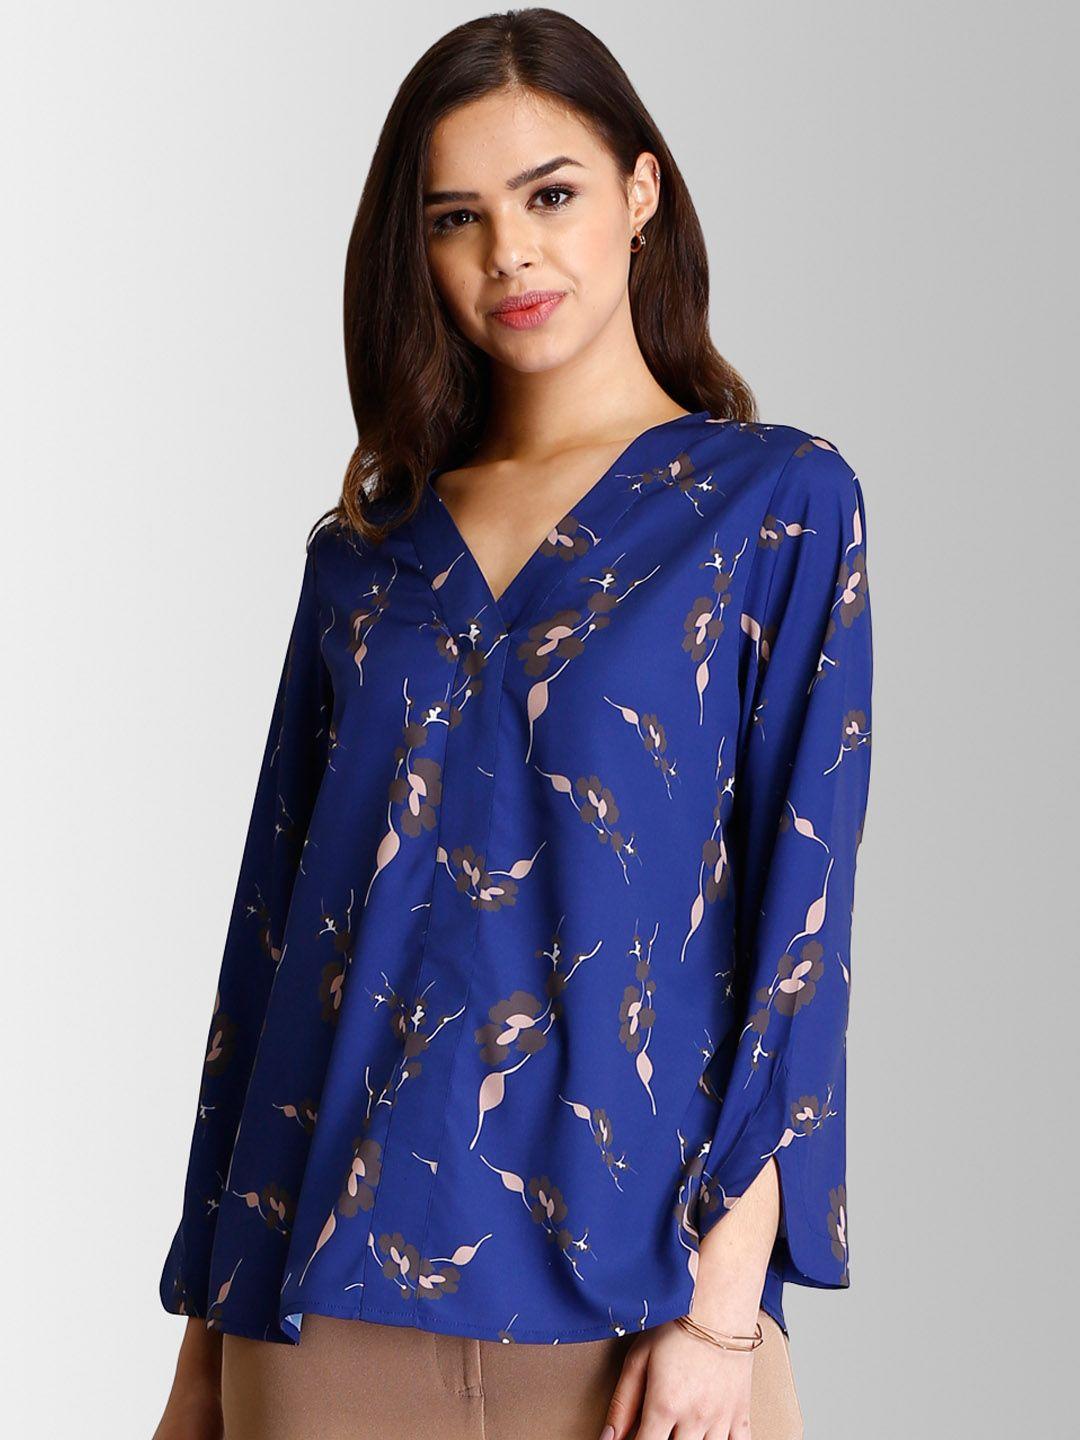 fablestreet women blue printed a-line top